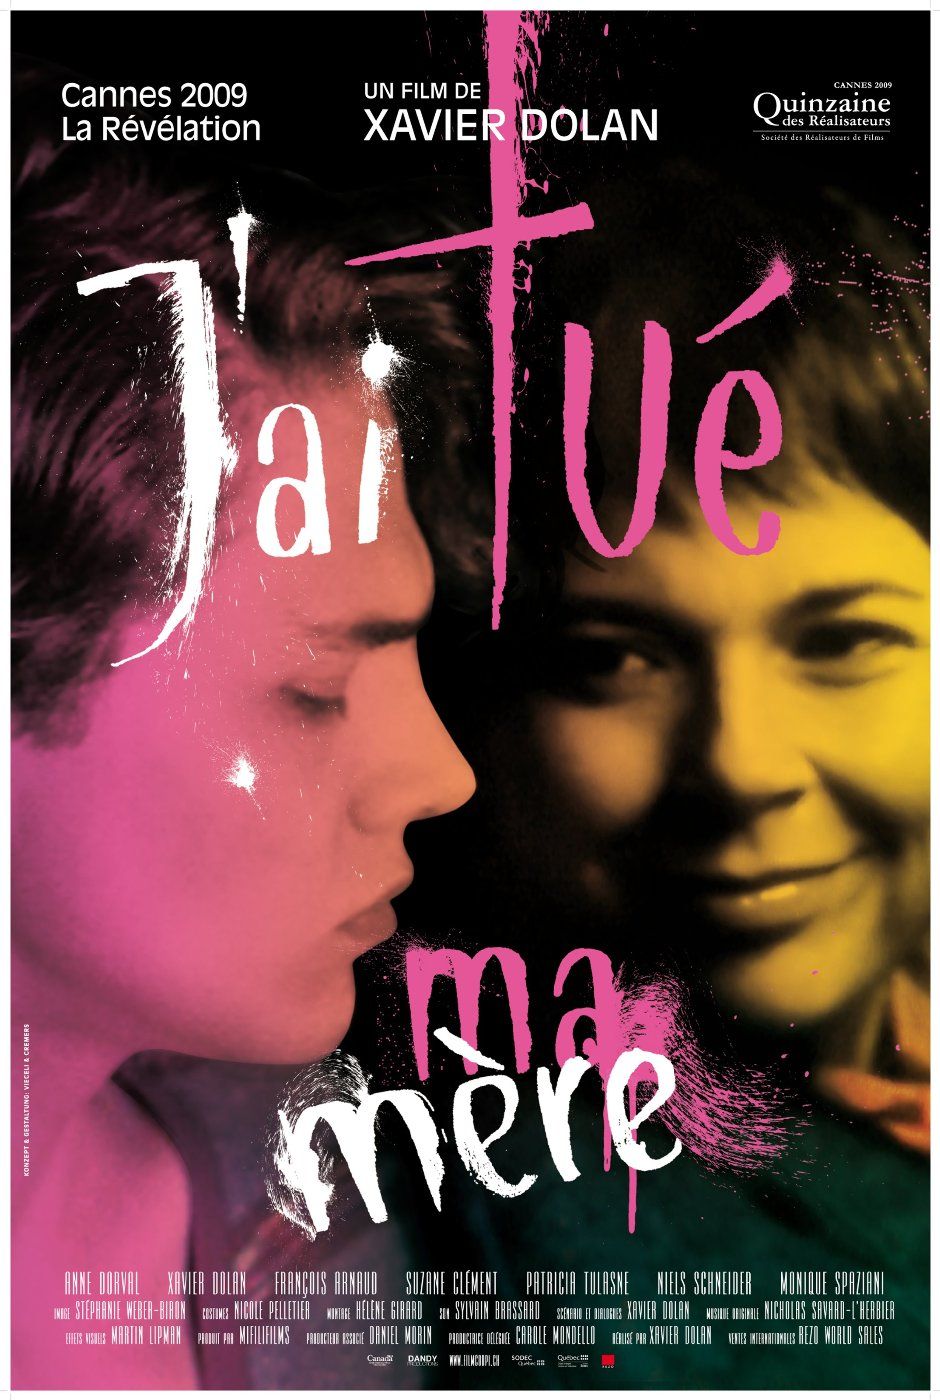 Extra Large Movie Poster Image for J'ai tué ma mère (#2 of 2)